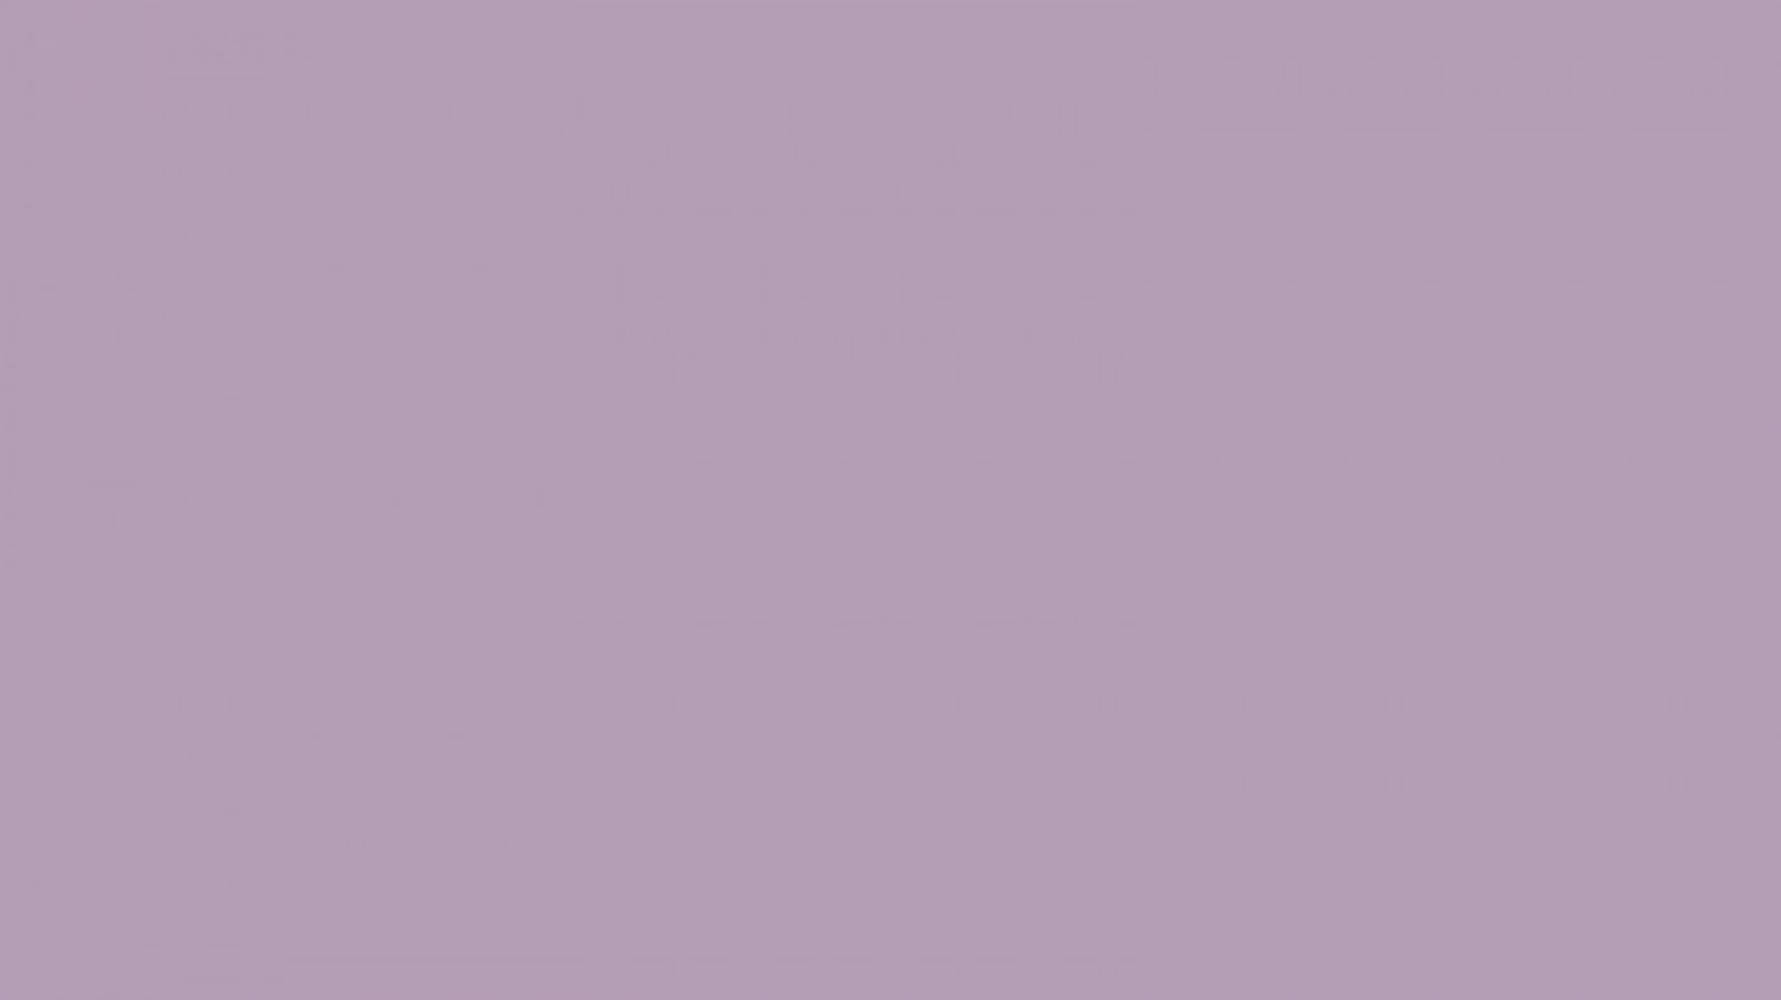 Solid Pastel Lilac Wallpaper